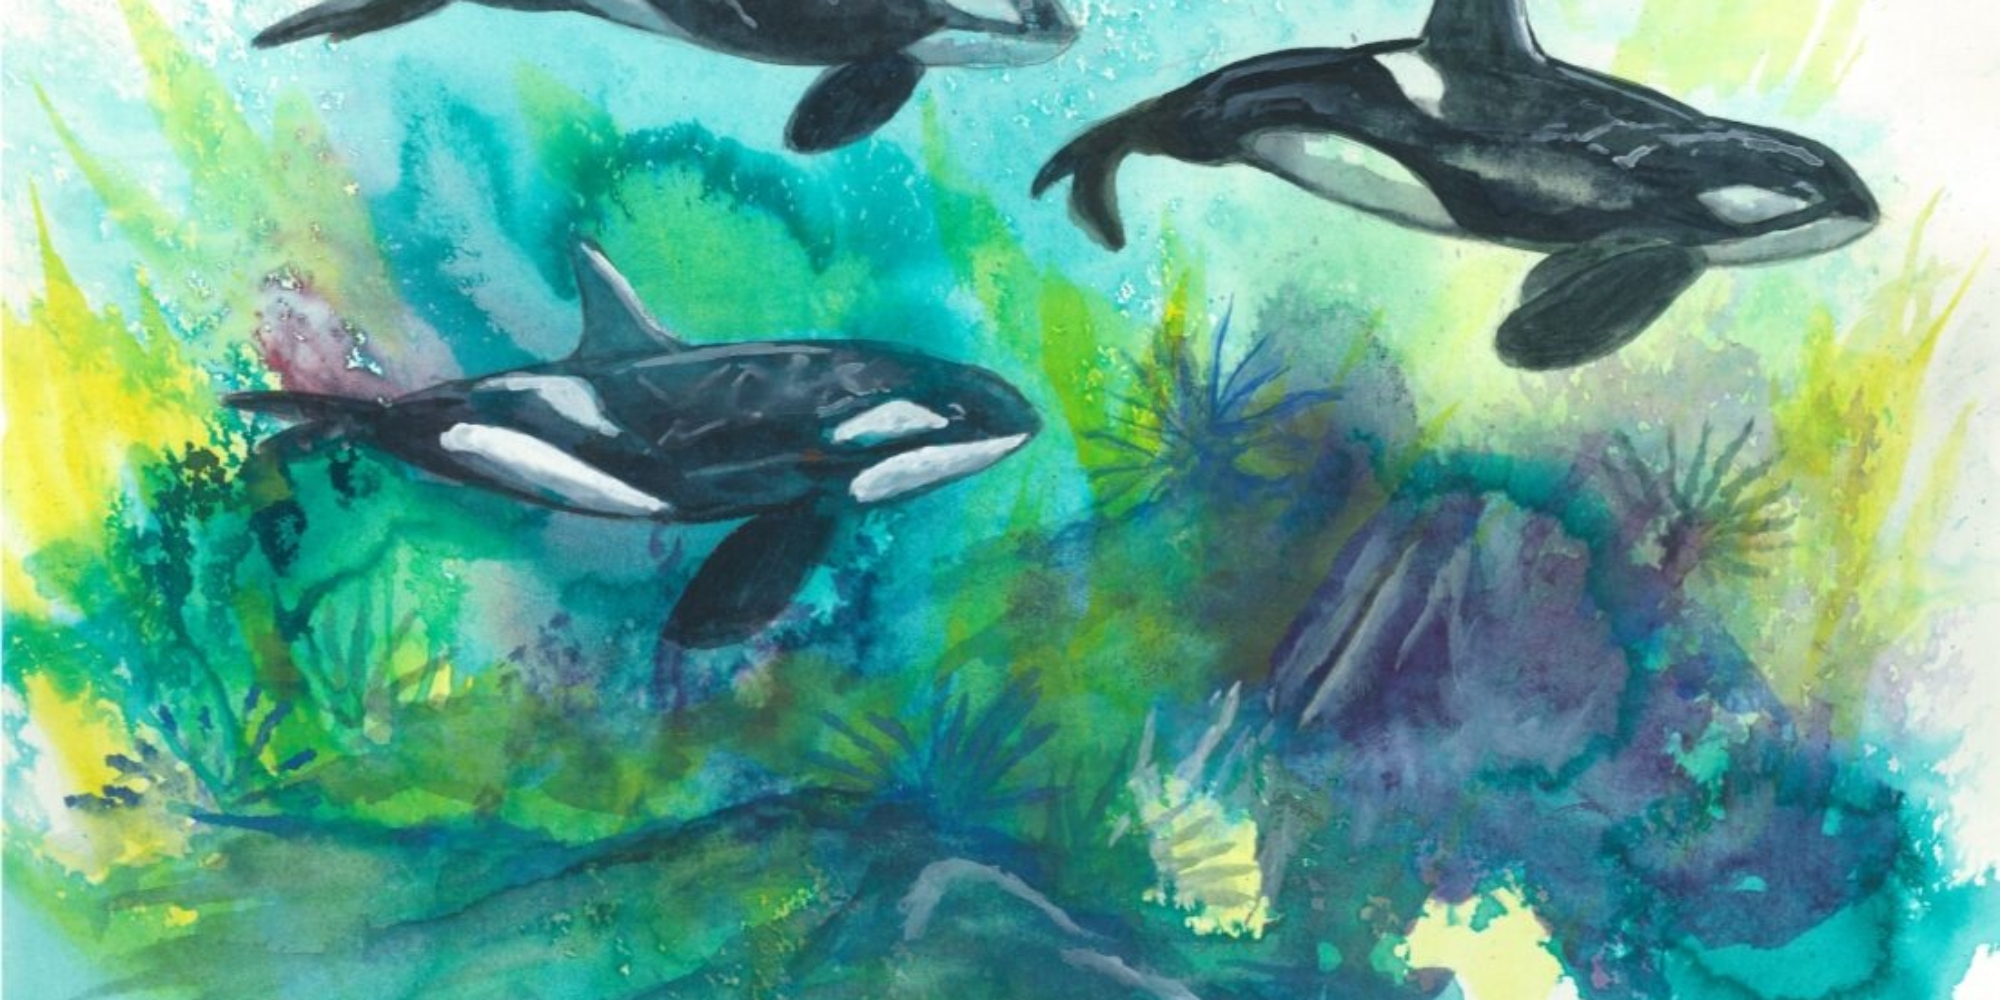 "Killer Pod" 
9x12 watercolor depicting pod of three killer whales swimming through ocean foliage. Original framed watercolor available as well as 9x12 prints.